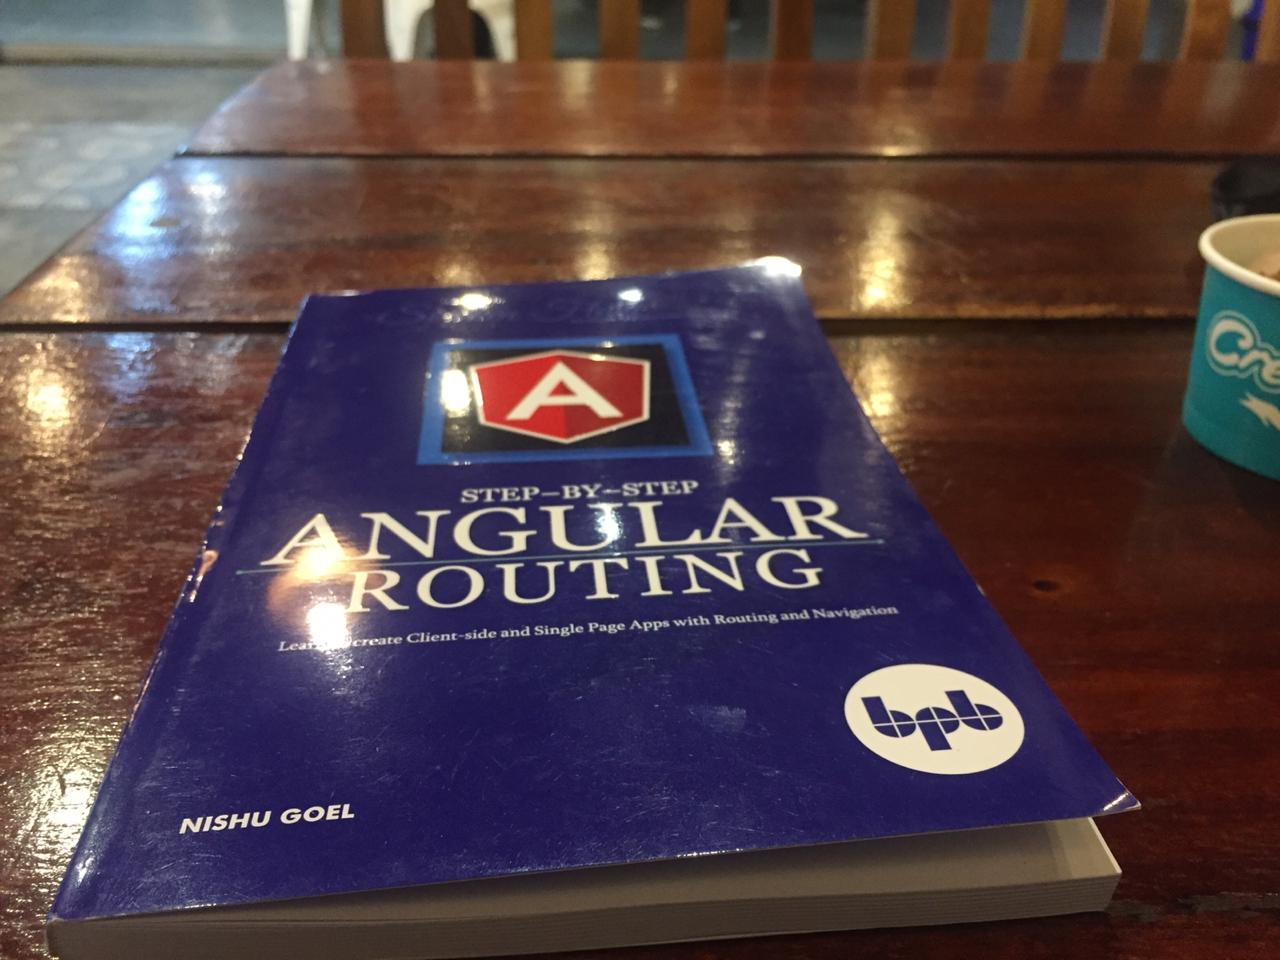 The book Angular Routing on a table.